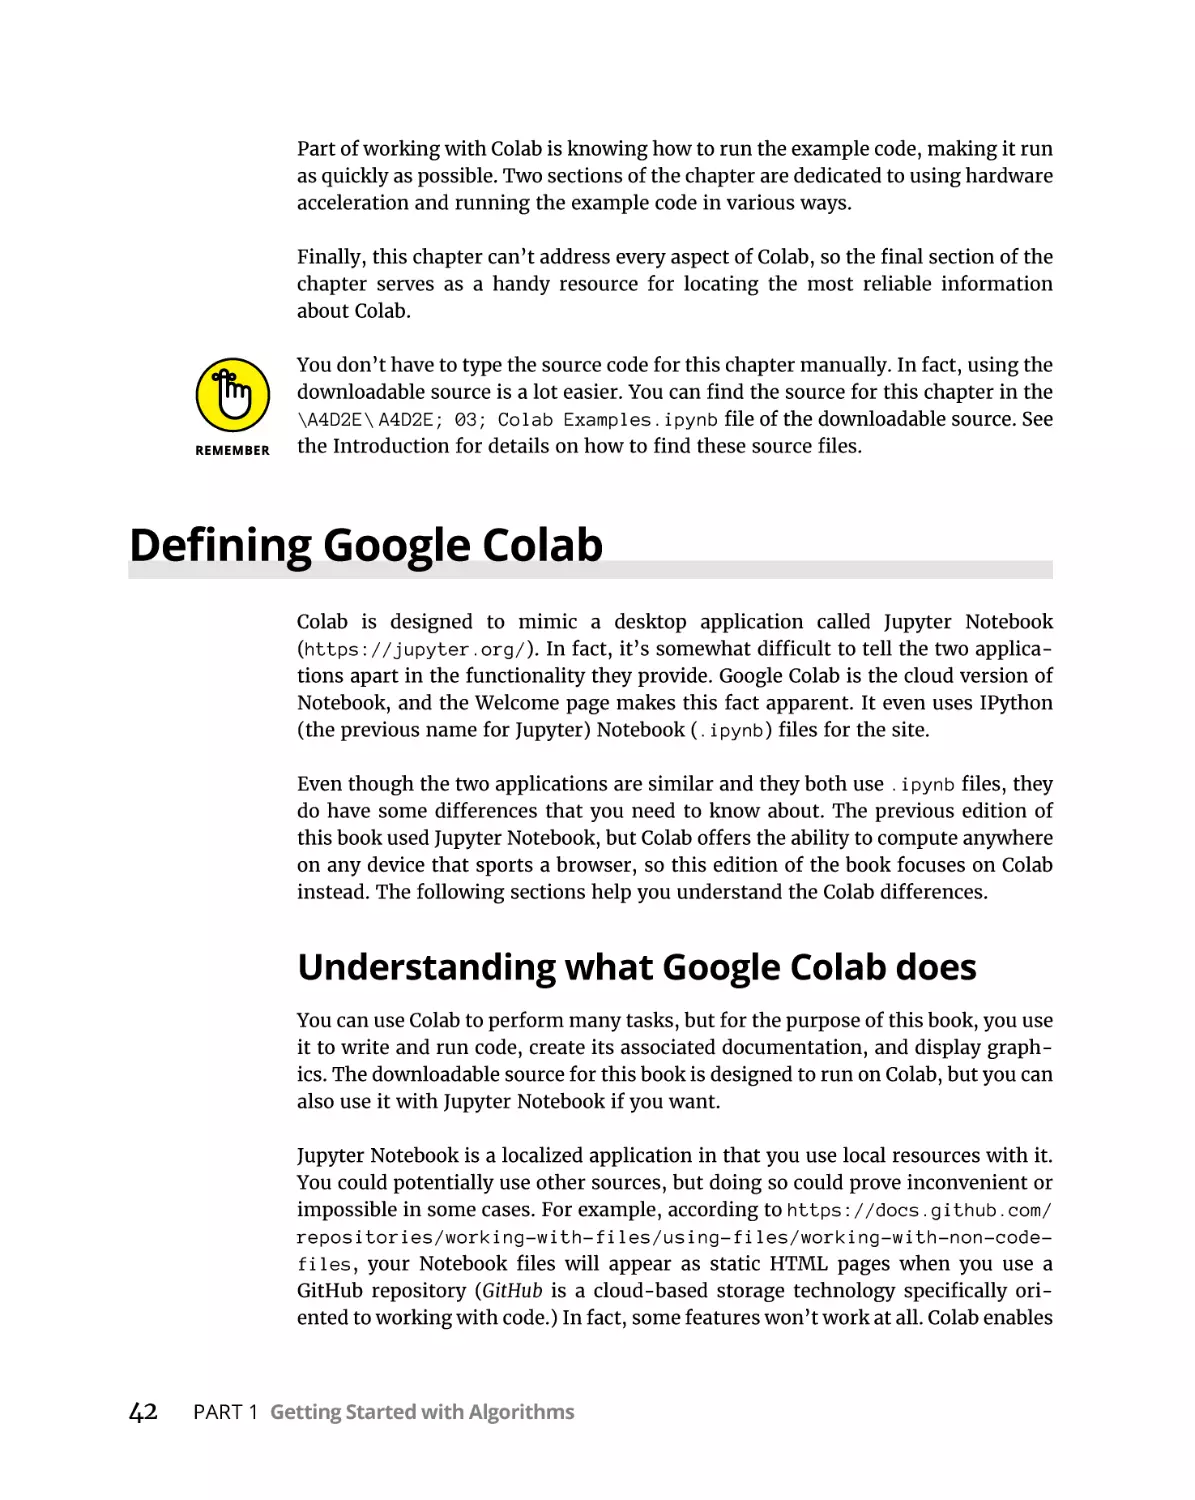 Defining Google Colab
Understanding what Google Colab does